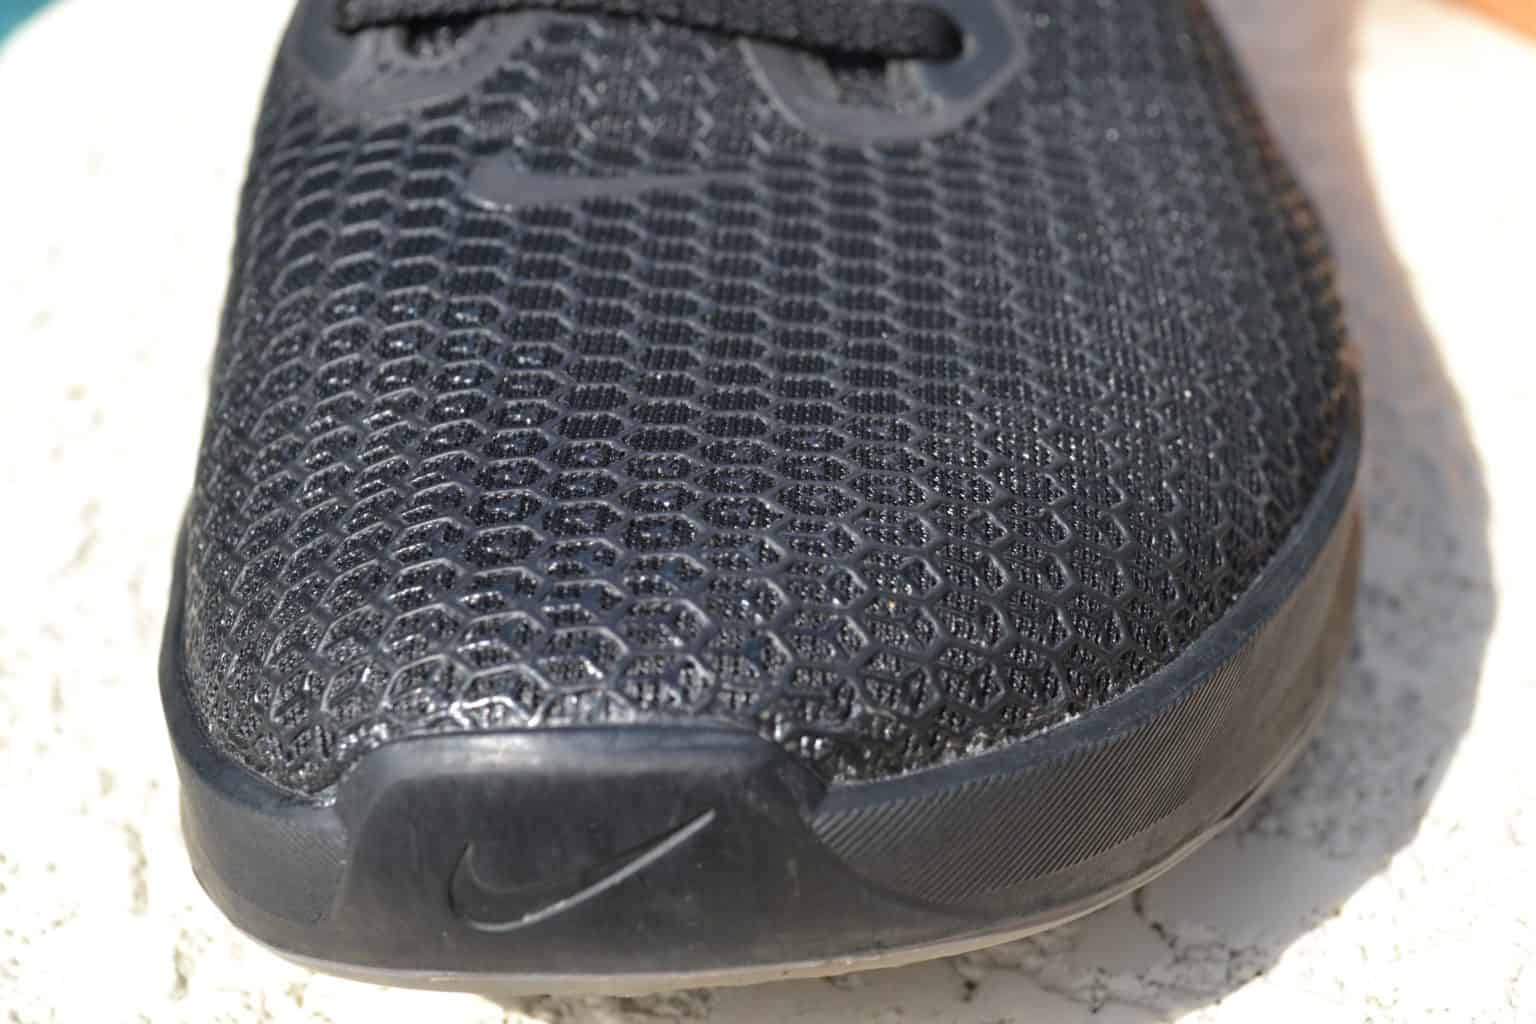 Nike Metcon 6 Shoe Review - Fit at Midlife